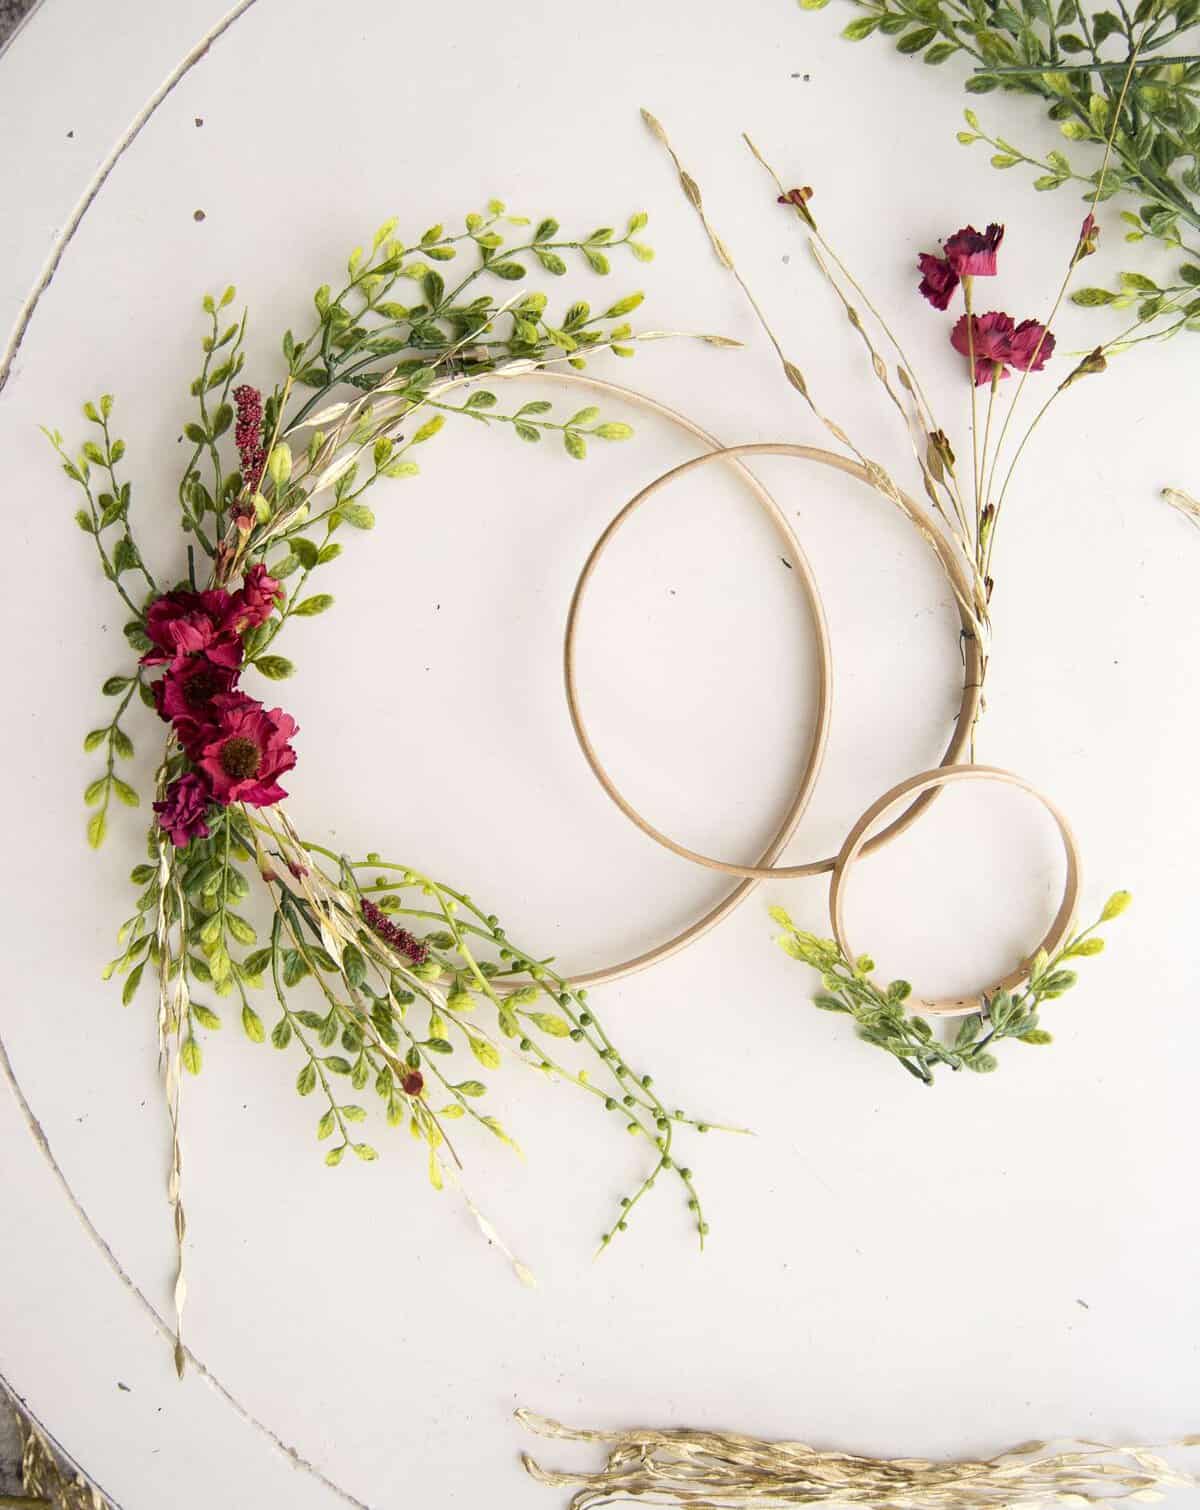 If you're looking for a unique, affordable and simple way to add interest to your home then make sure to try out my easy DIY hoop wreaths tutorial!